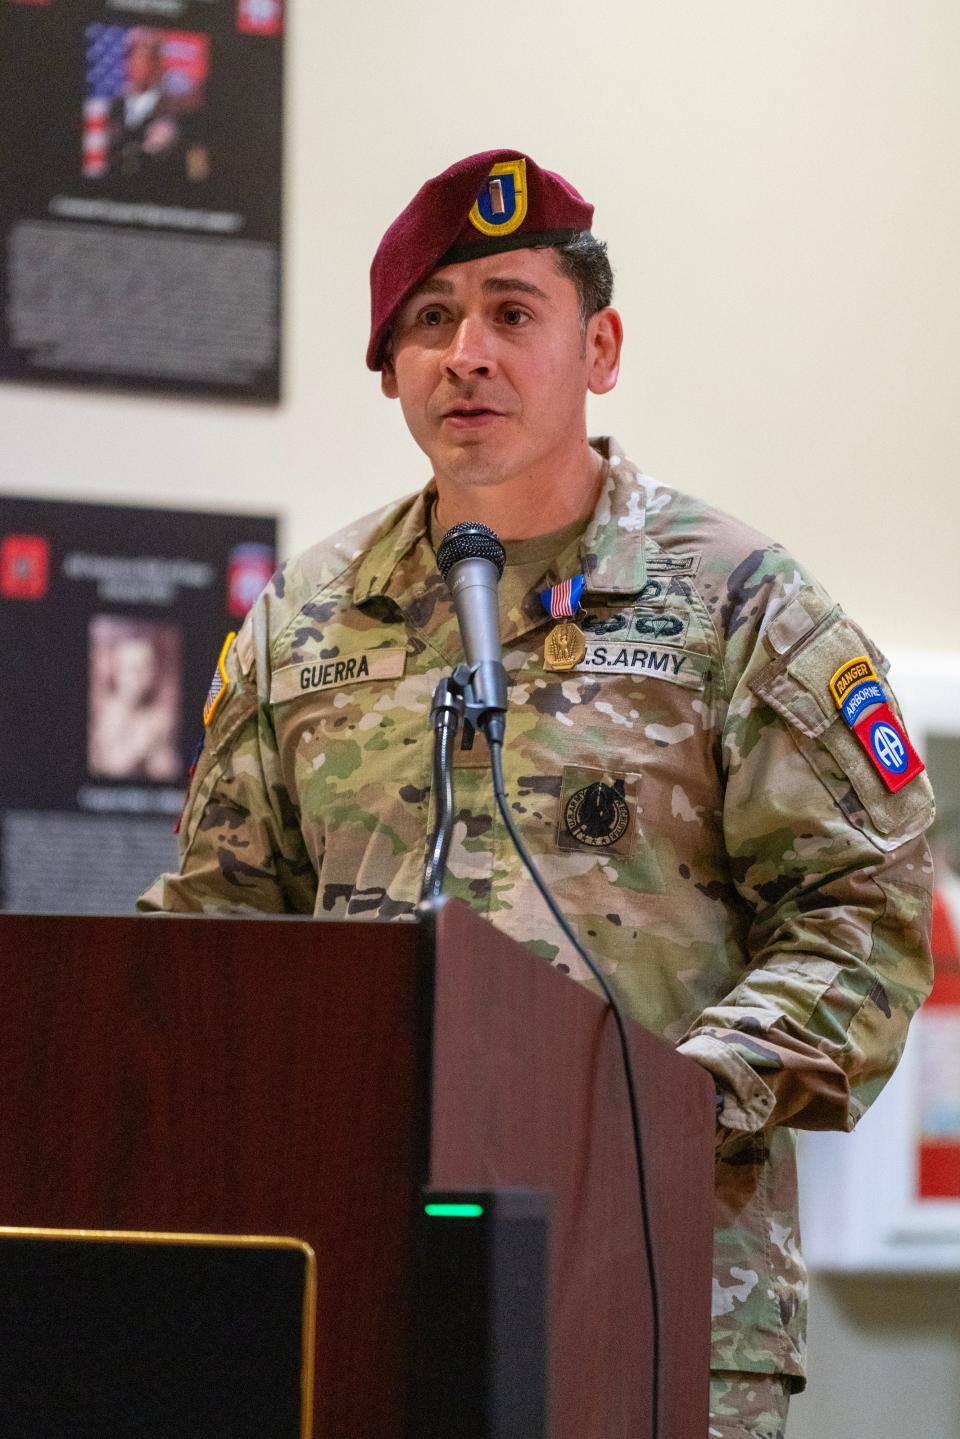 1st. Lt. Joseph Guerra speaks during a ceremony after receiving the Soldier's Medal during a ceremony Friday, Aug. 11, 2023, in the 82nd Airborne Division's Hall of Heroes at Fort Liberty.